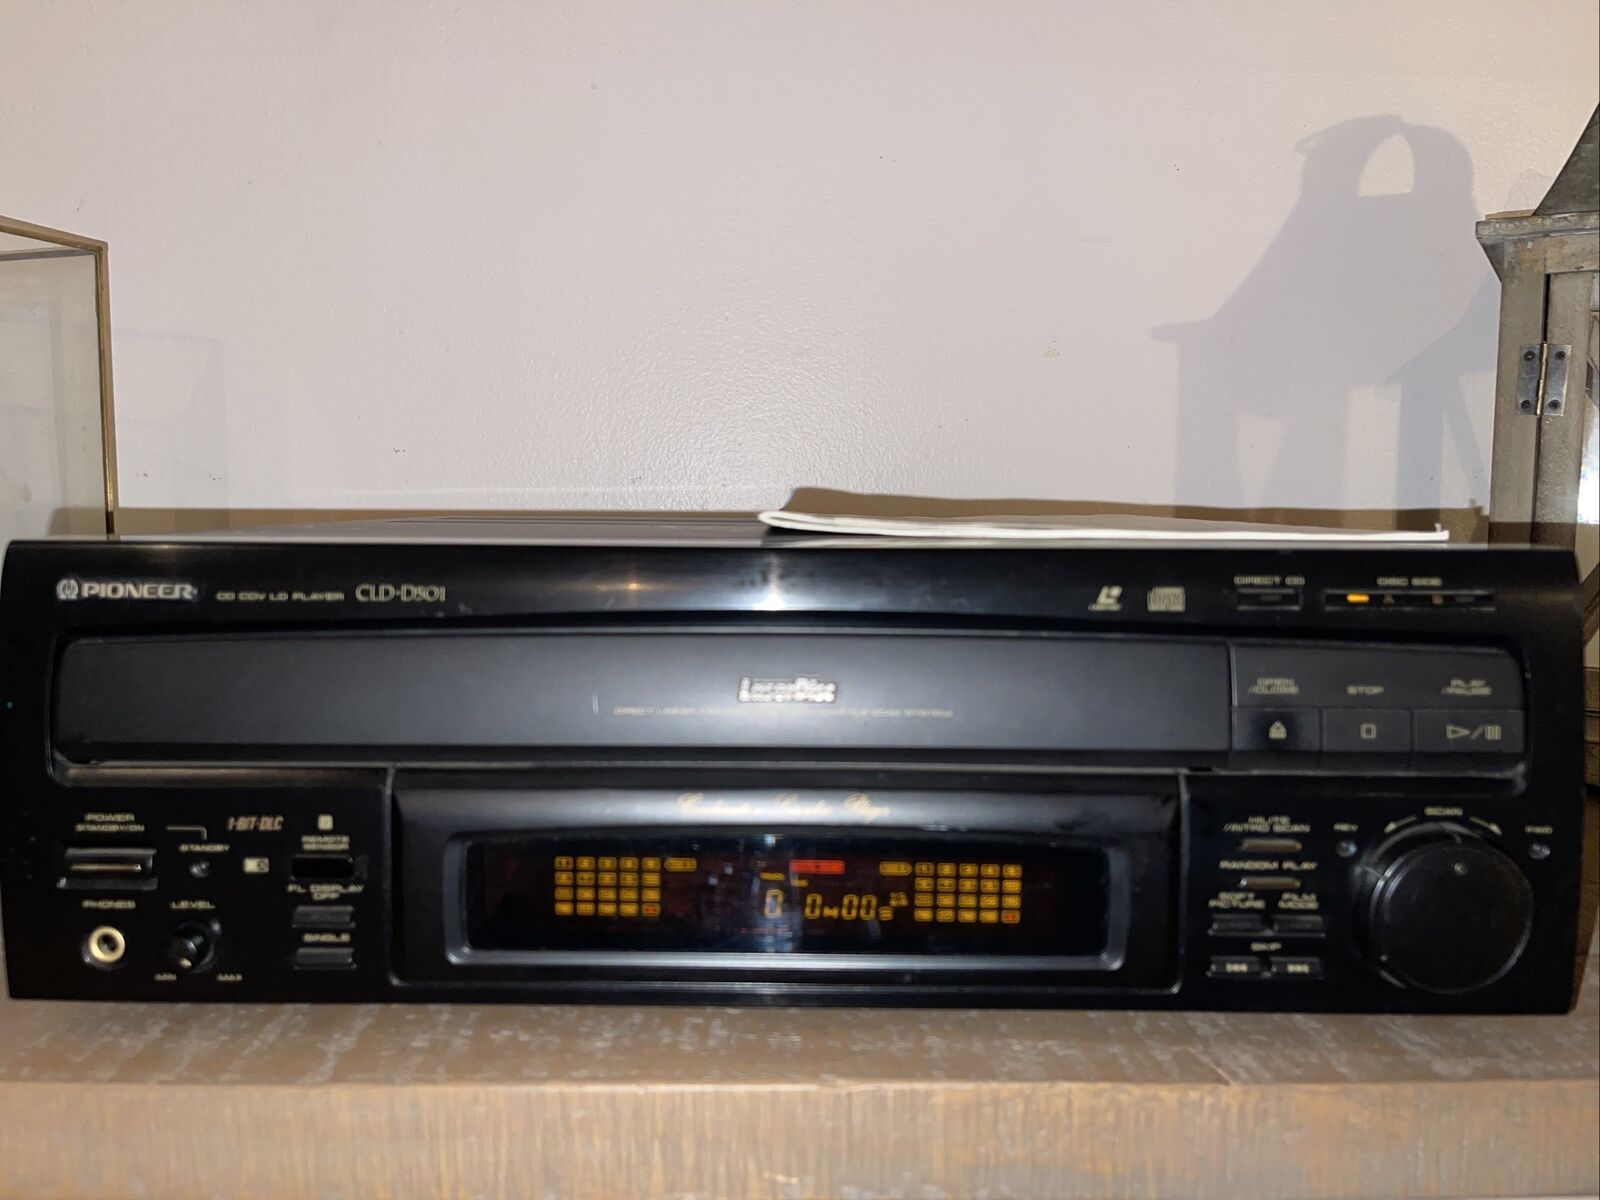 Pioneer Laser Disc Player Cld-d501 Cd Cdv Ld W/ Remote & Instructions. Mint